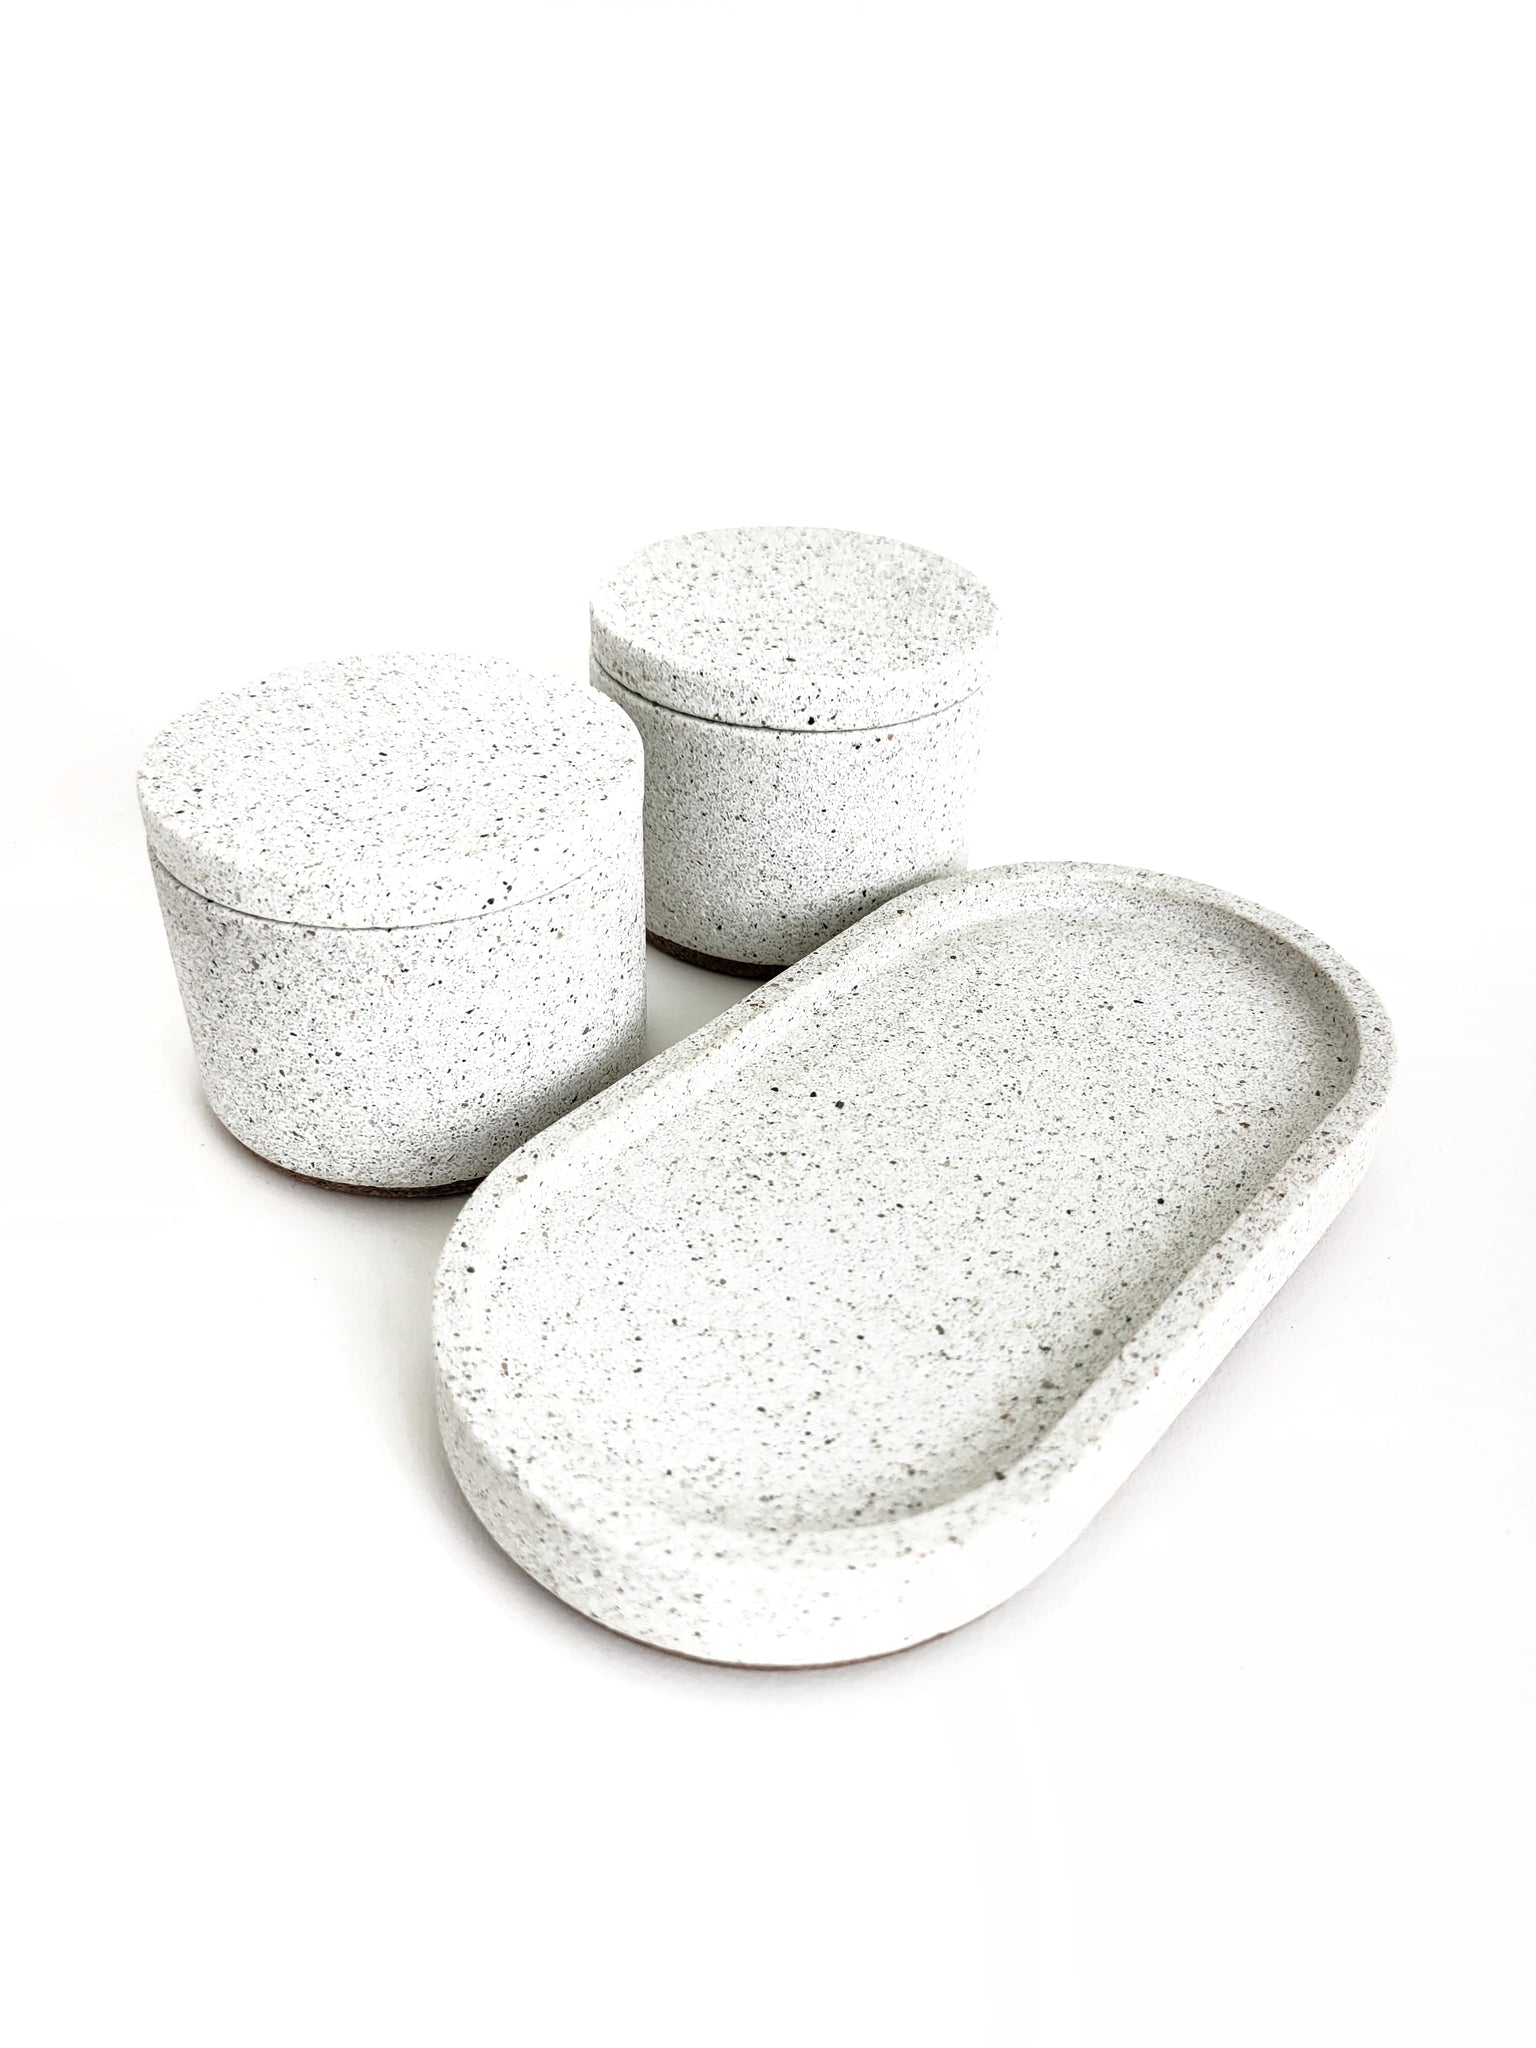 Sandstone Salt and Pepper Sets | Includes (FREE) Tray